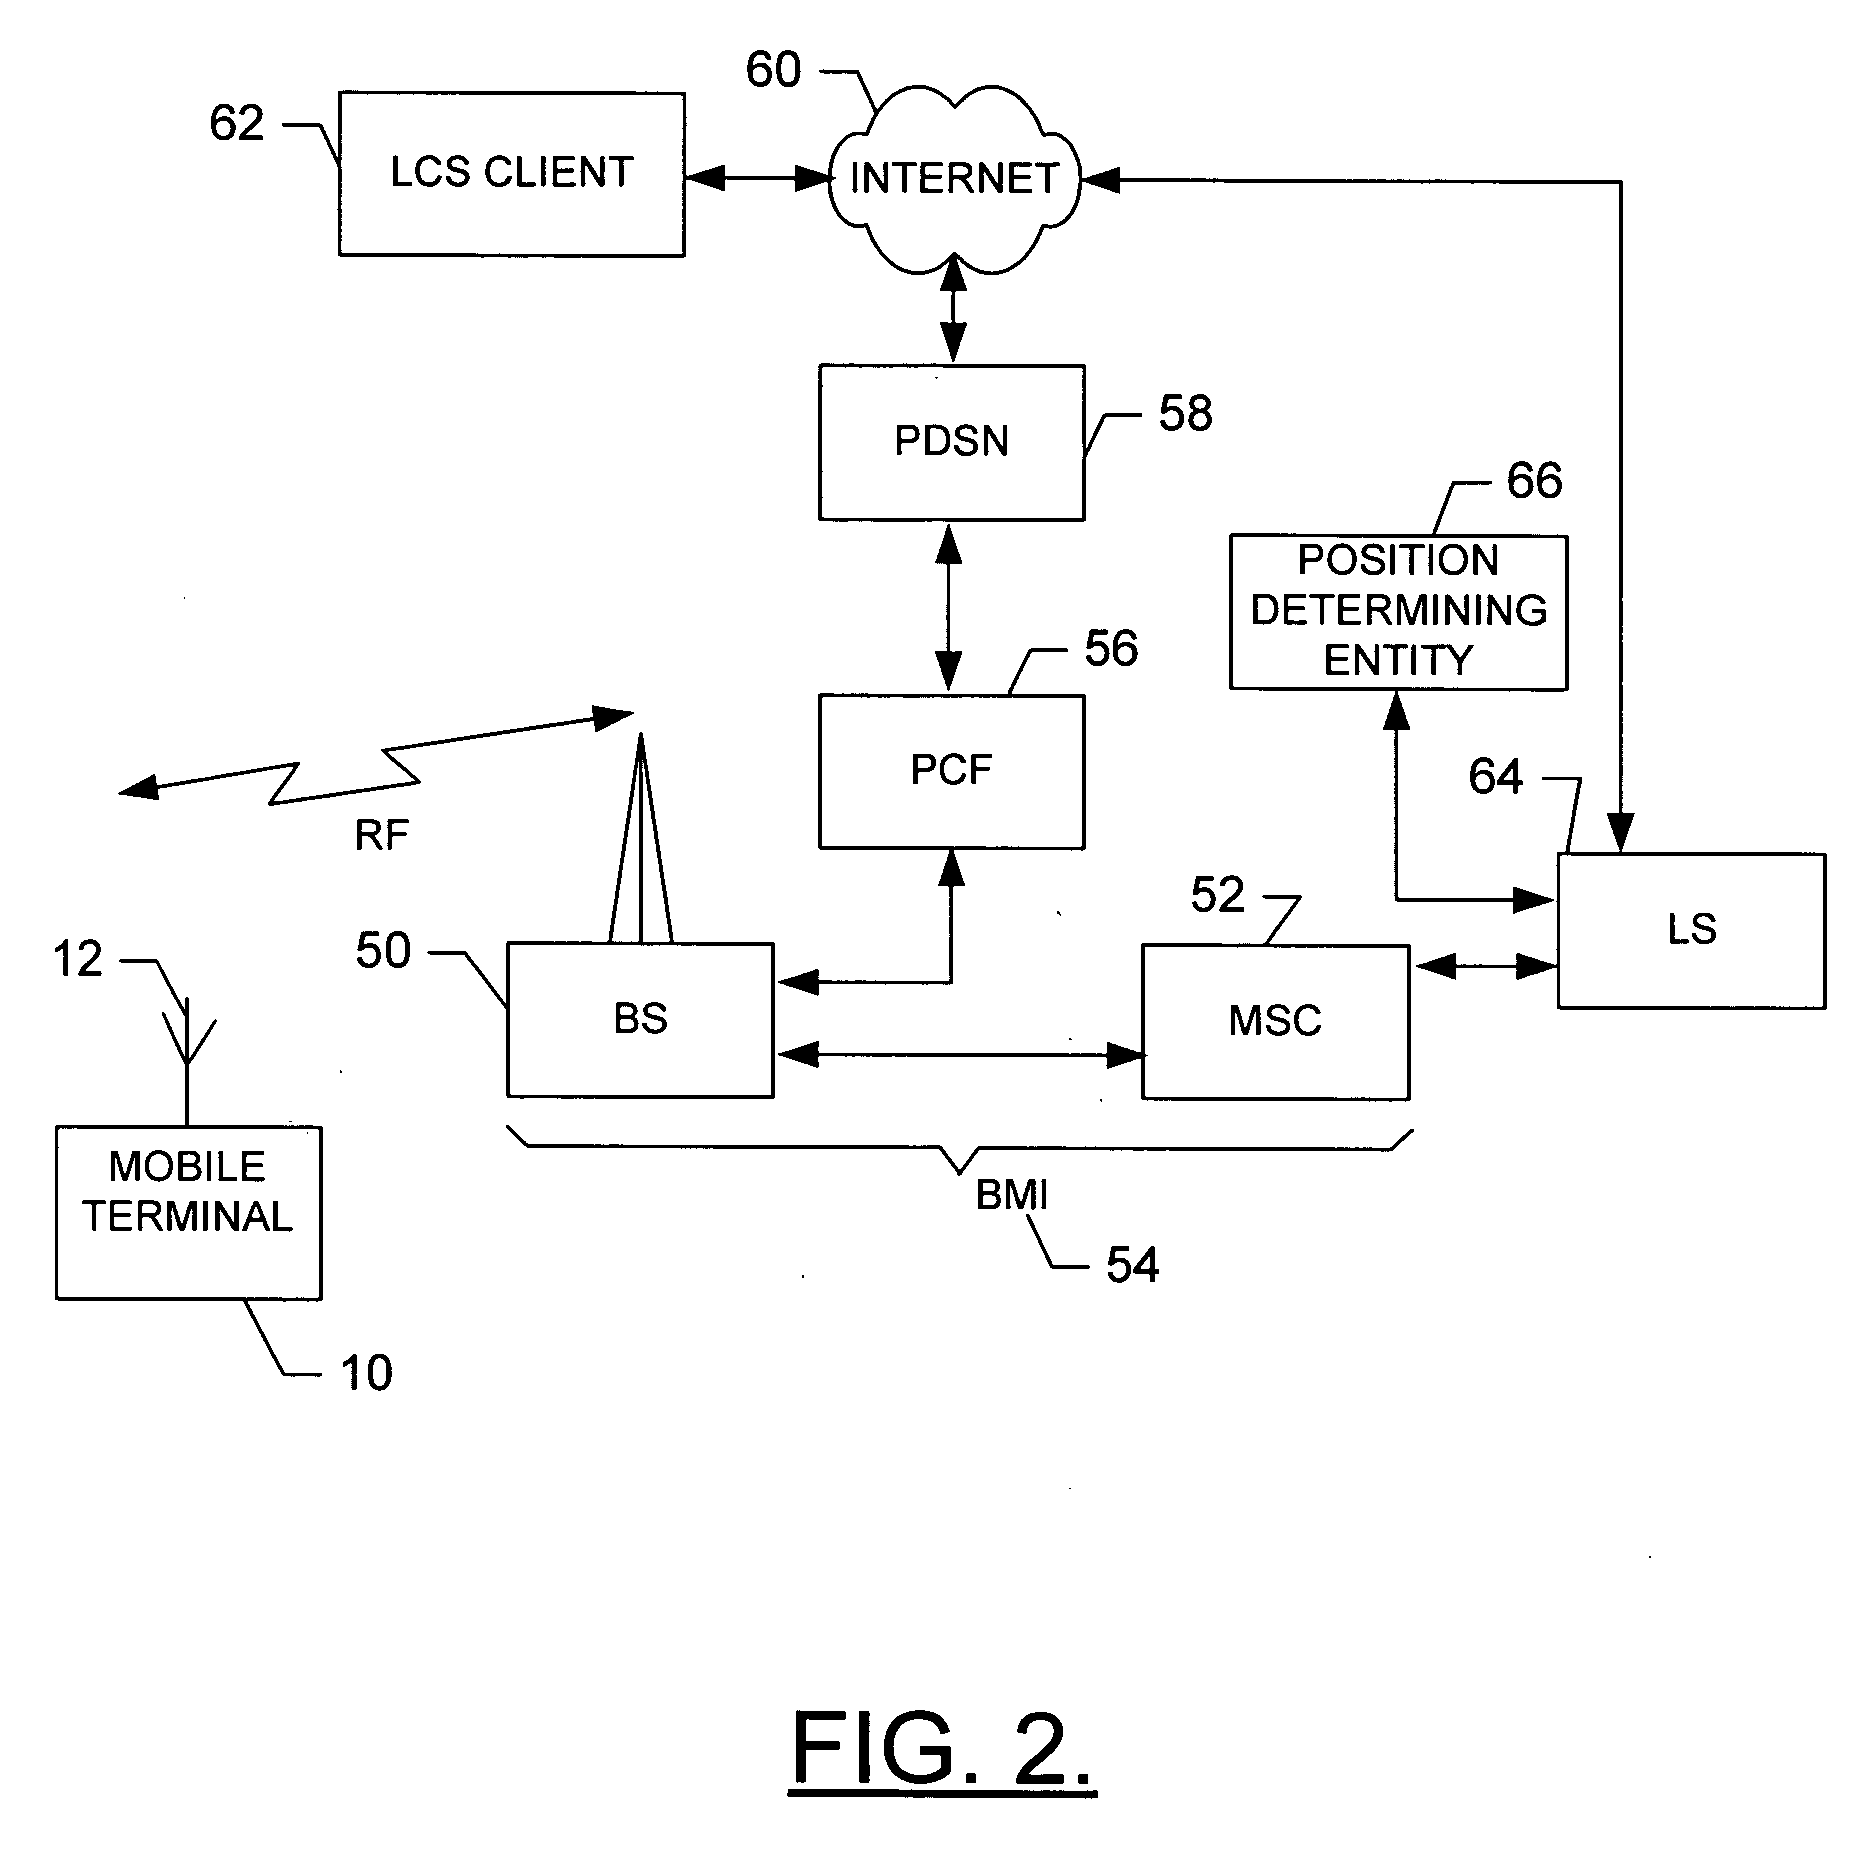 Method, apparatus and computer program product for determining location of a mobile terminal